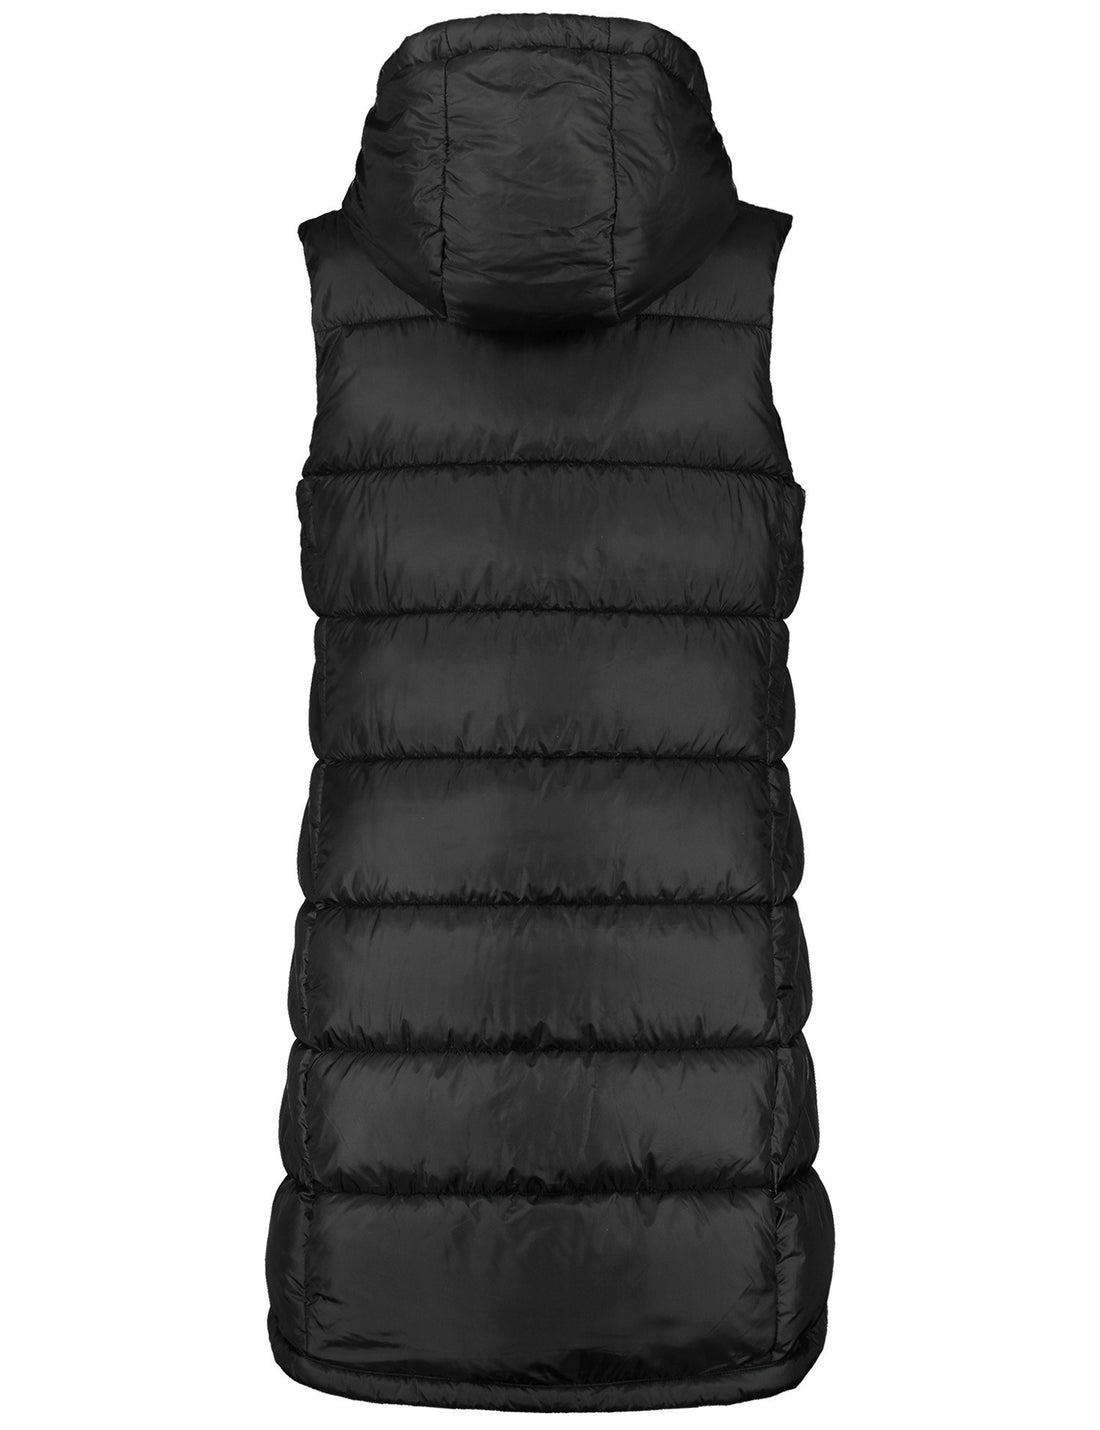 Long Body Warmer With A Down Feel And A Drawstring_945506-31193_11000_02